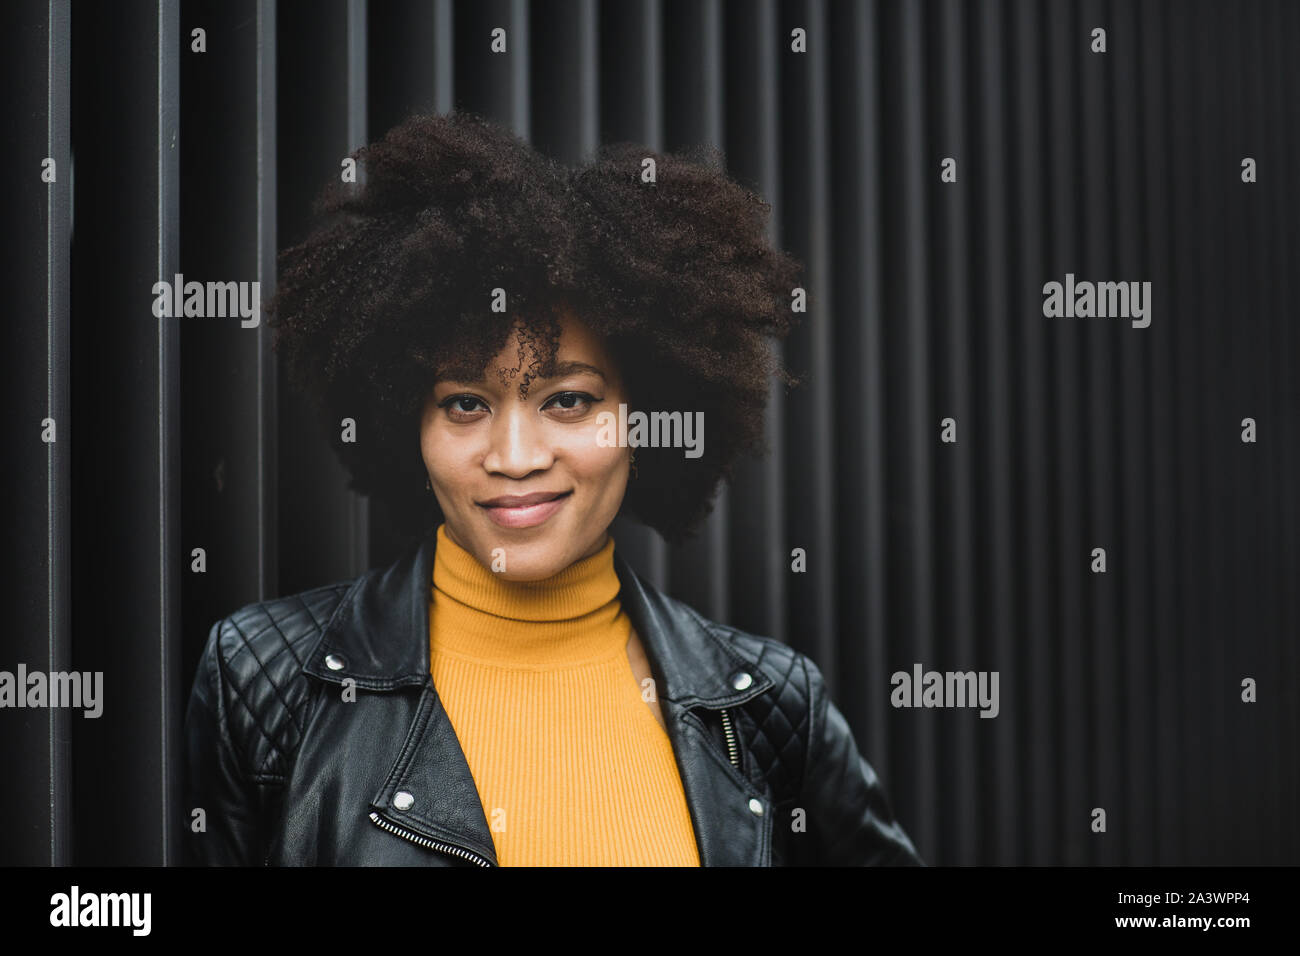 Portrait of African American young adult female with black background Stock Photo